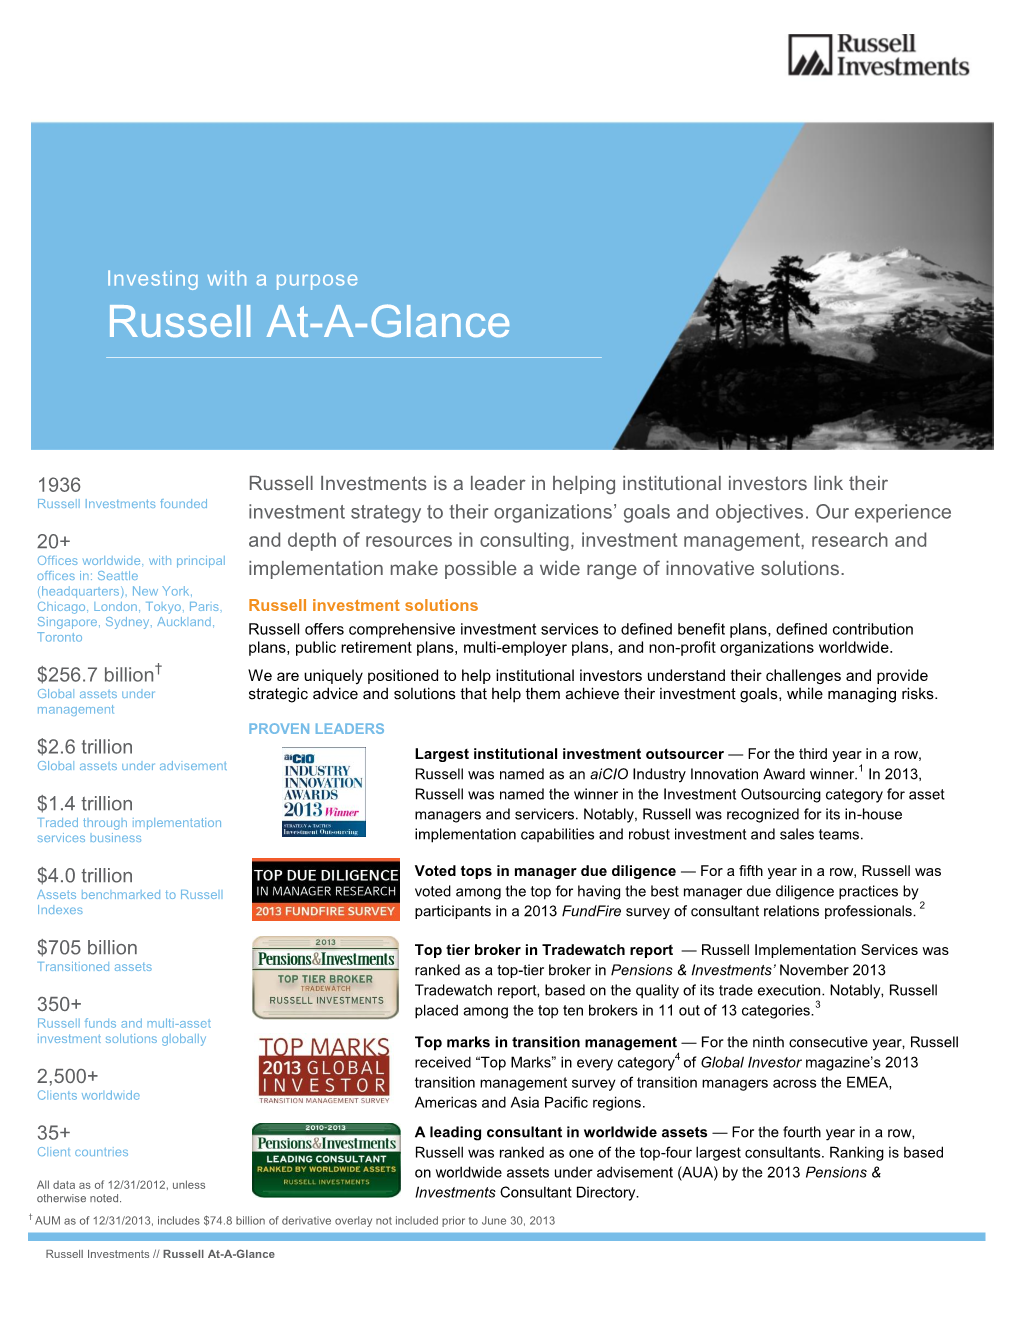 Russell At-A-Glance: AI Overview